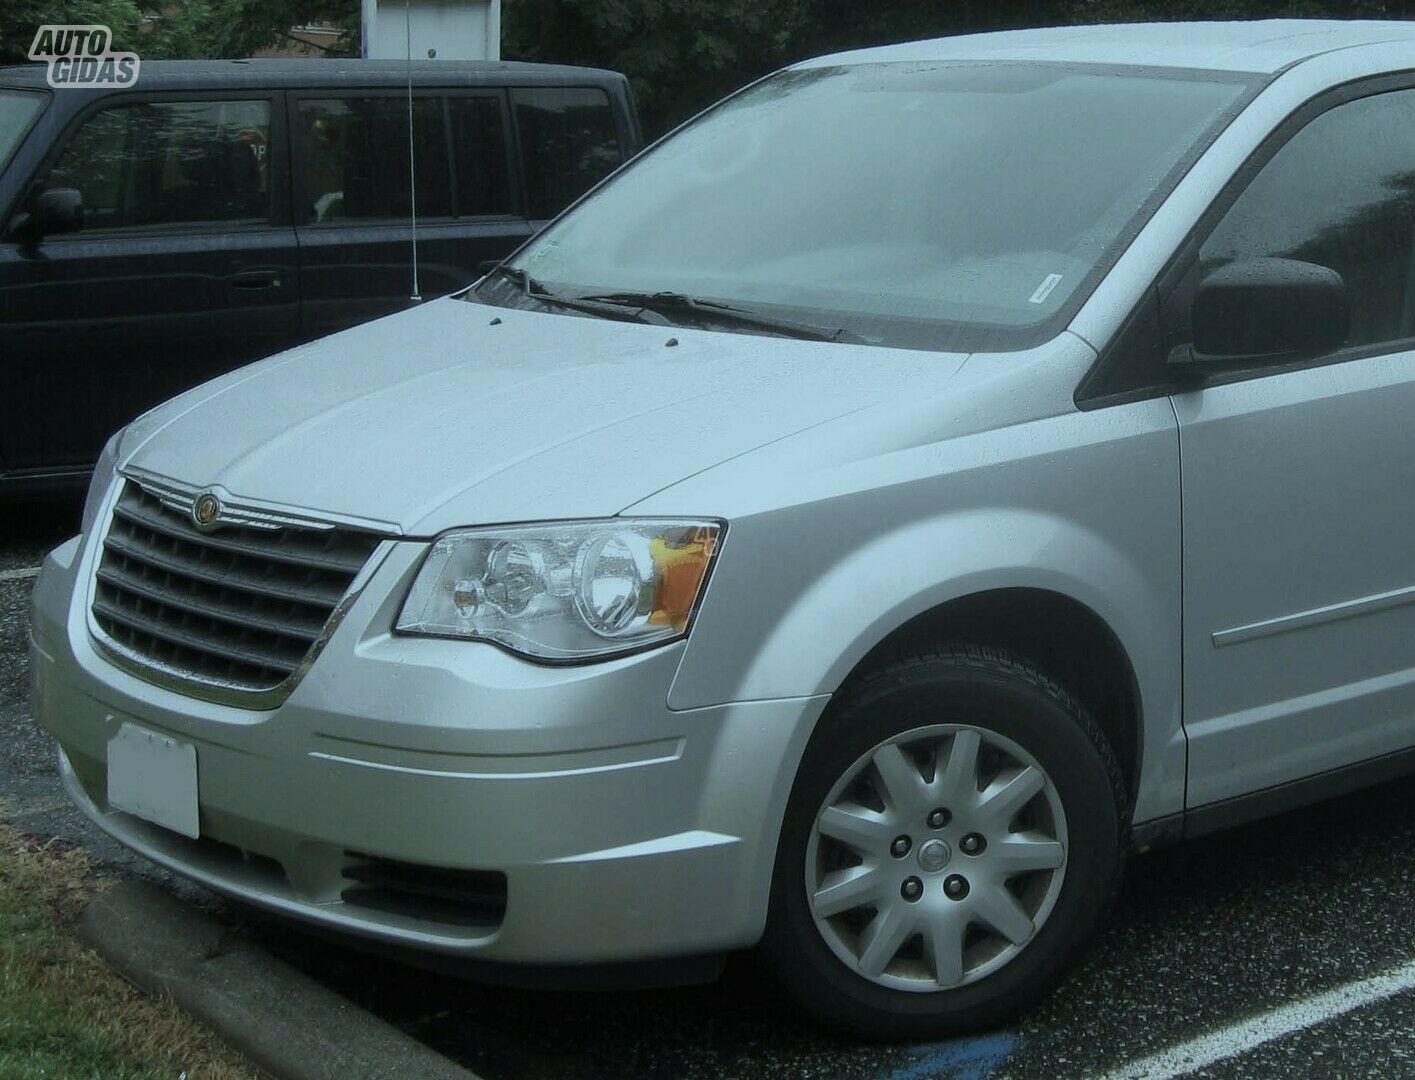 Chrysler Town & Country 2009 m dalys